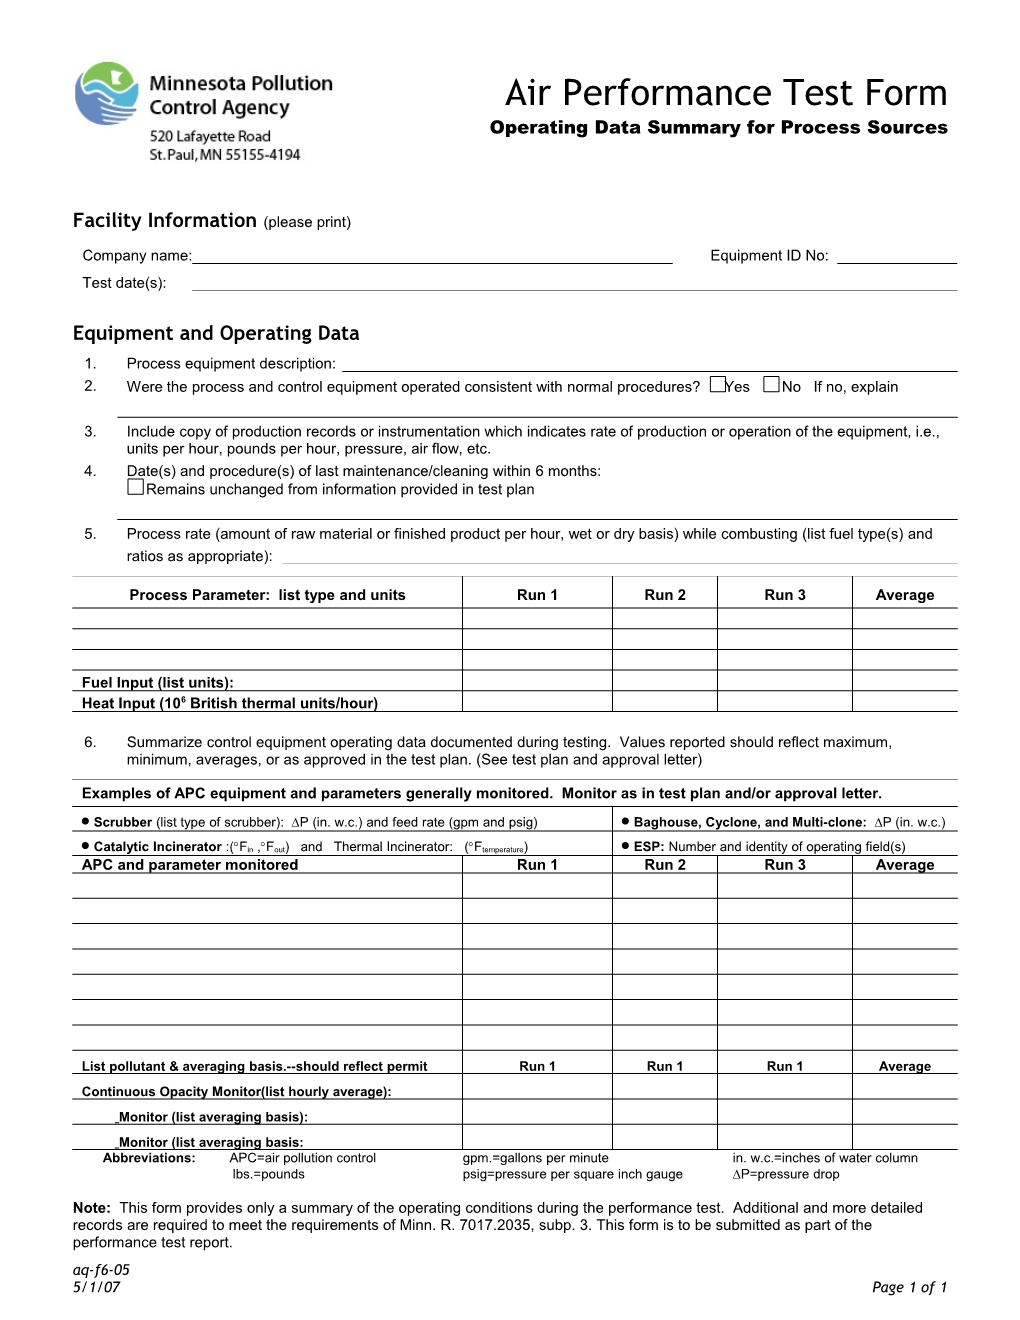 Air Performance Test Forms - Operating Data Summary for Combustion Sources